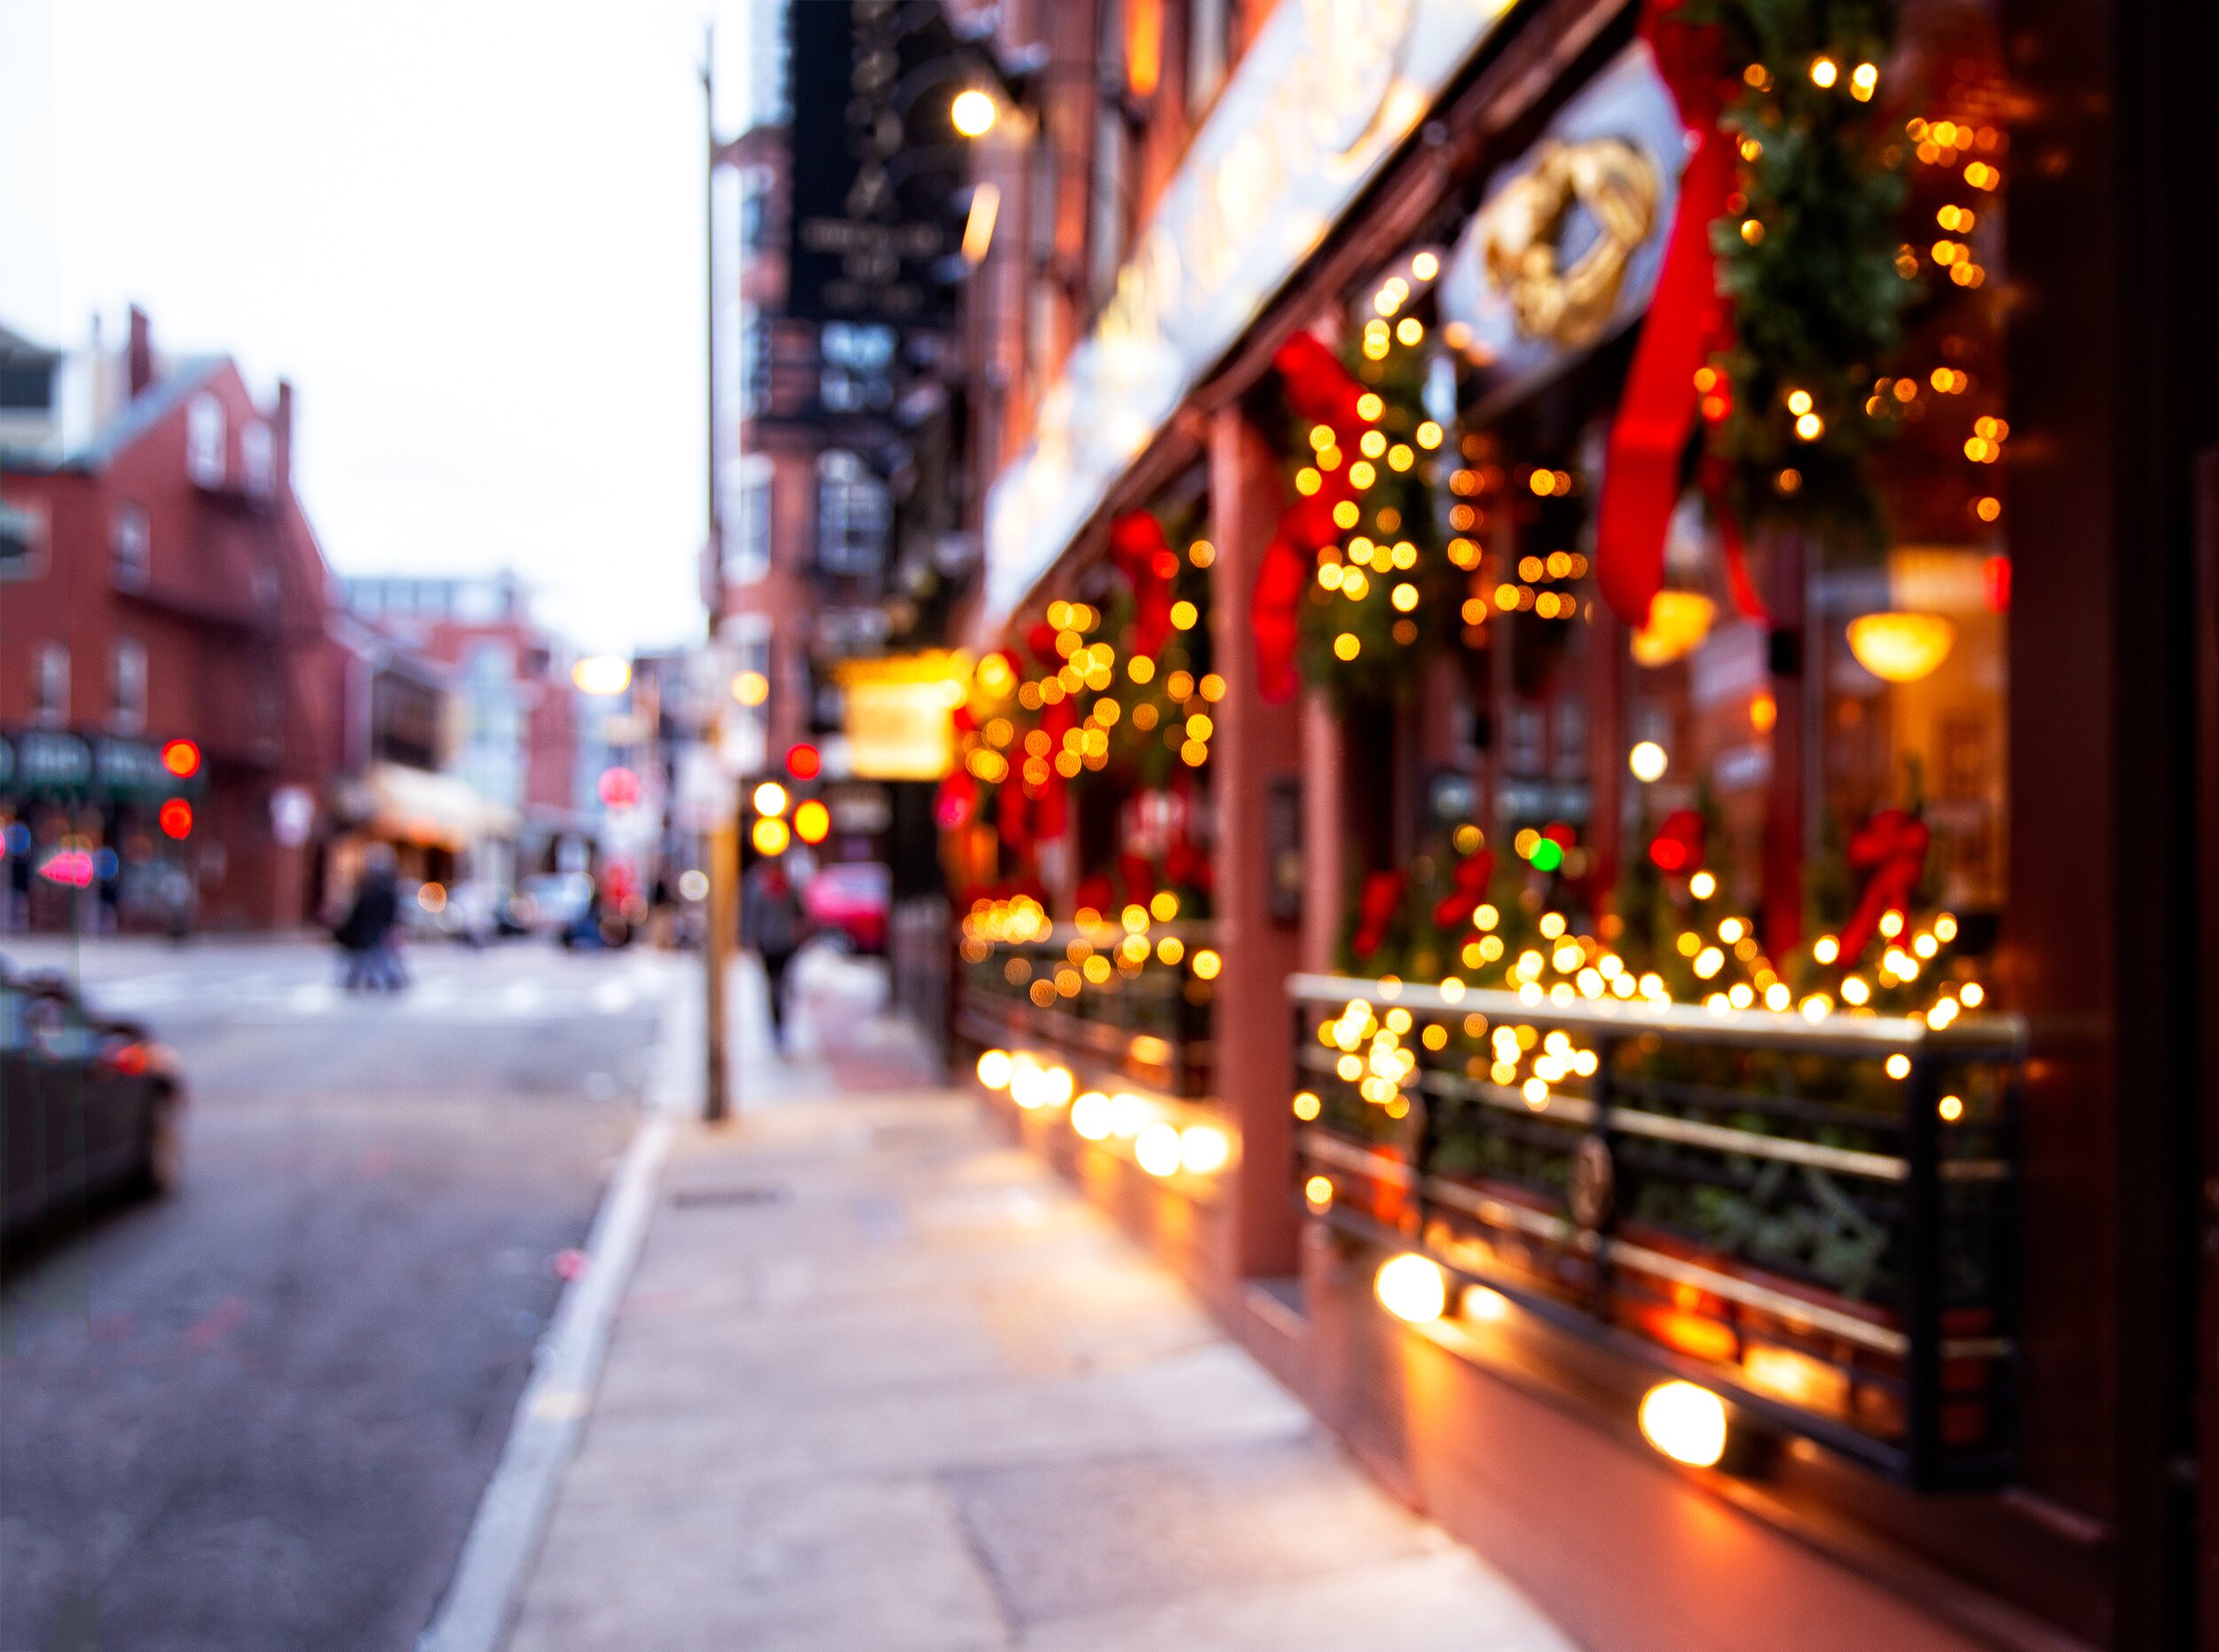 Hospitality delivers ‘bumper Christmas’ but challenges remain, research shows